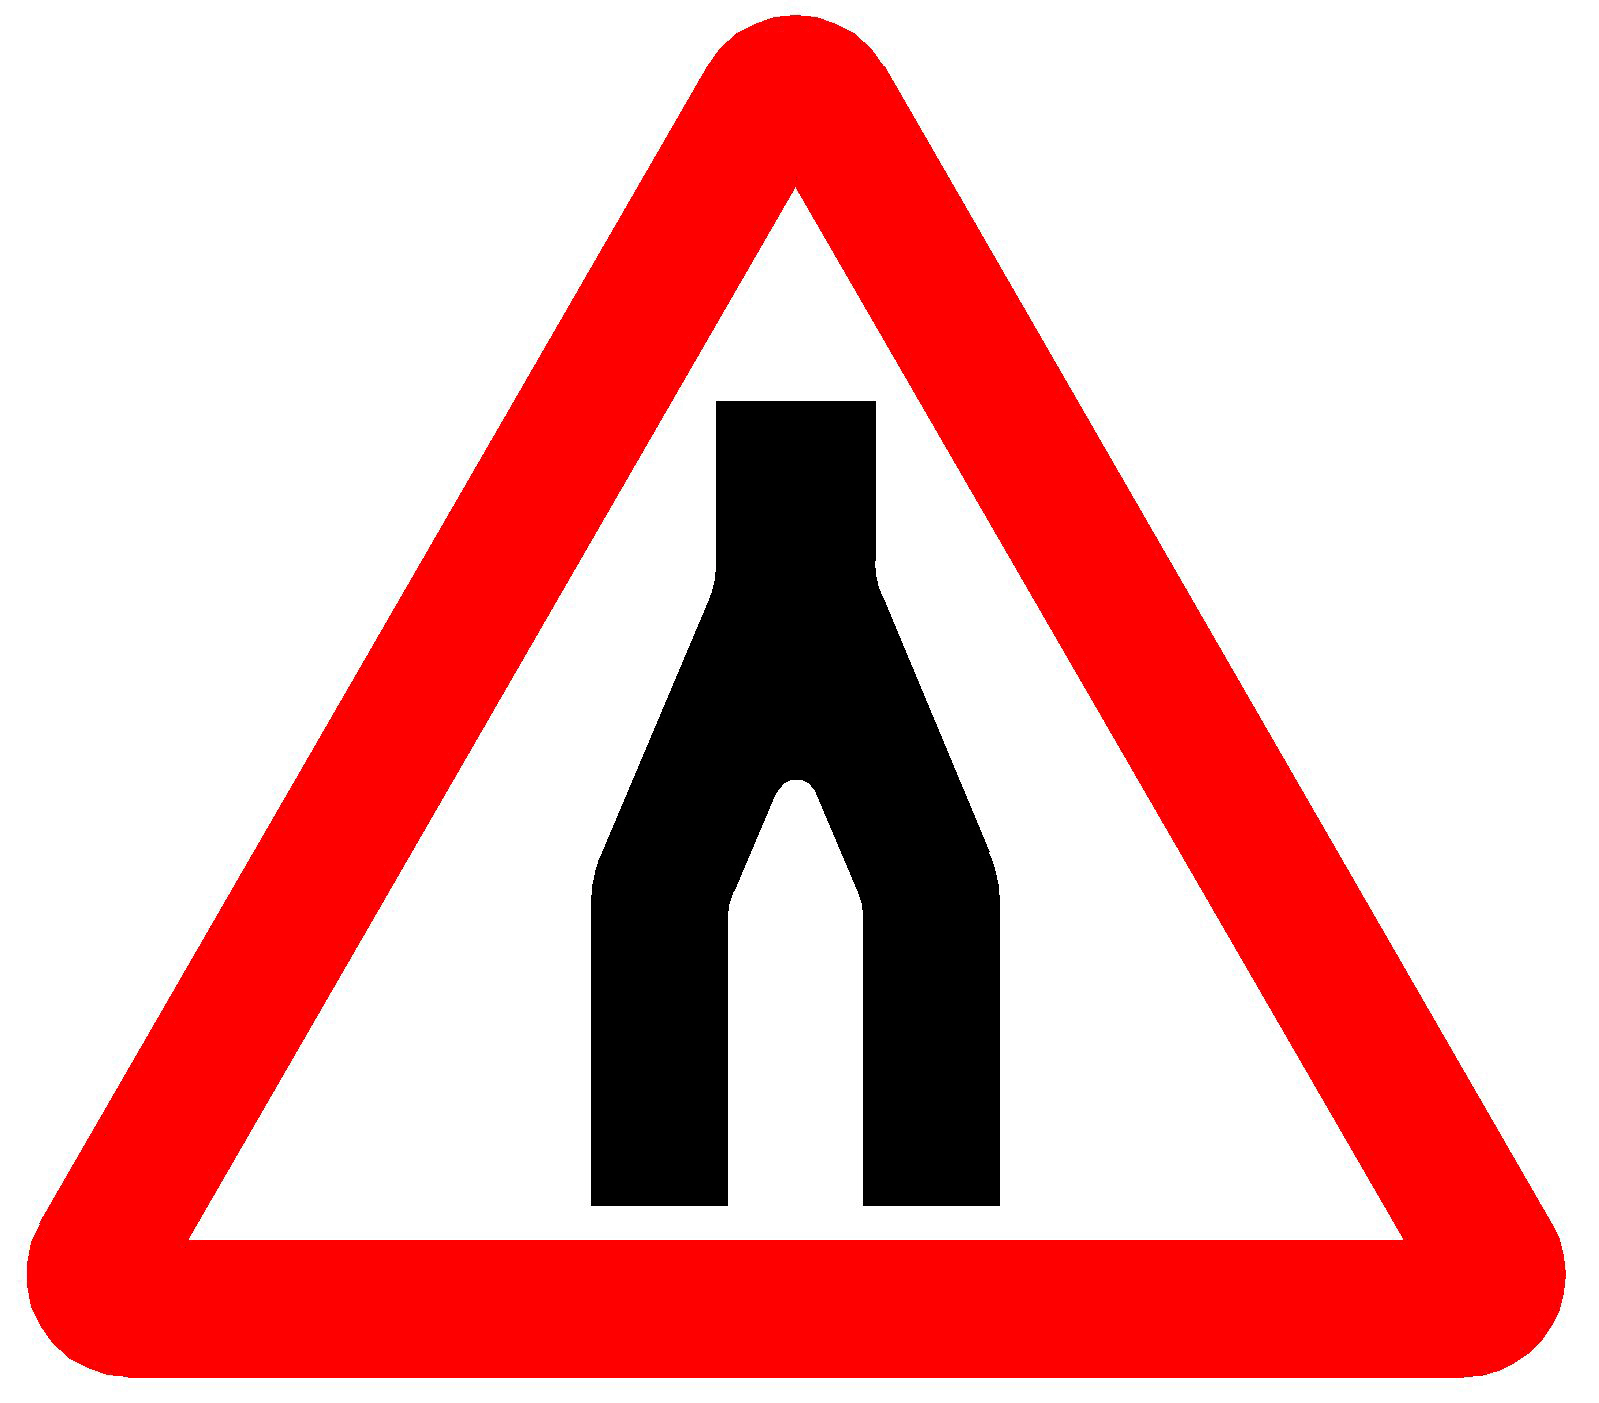 Transport Department - Signs giving Warning